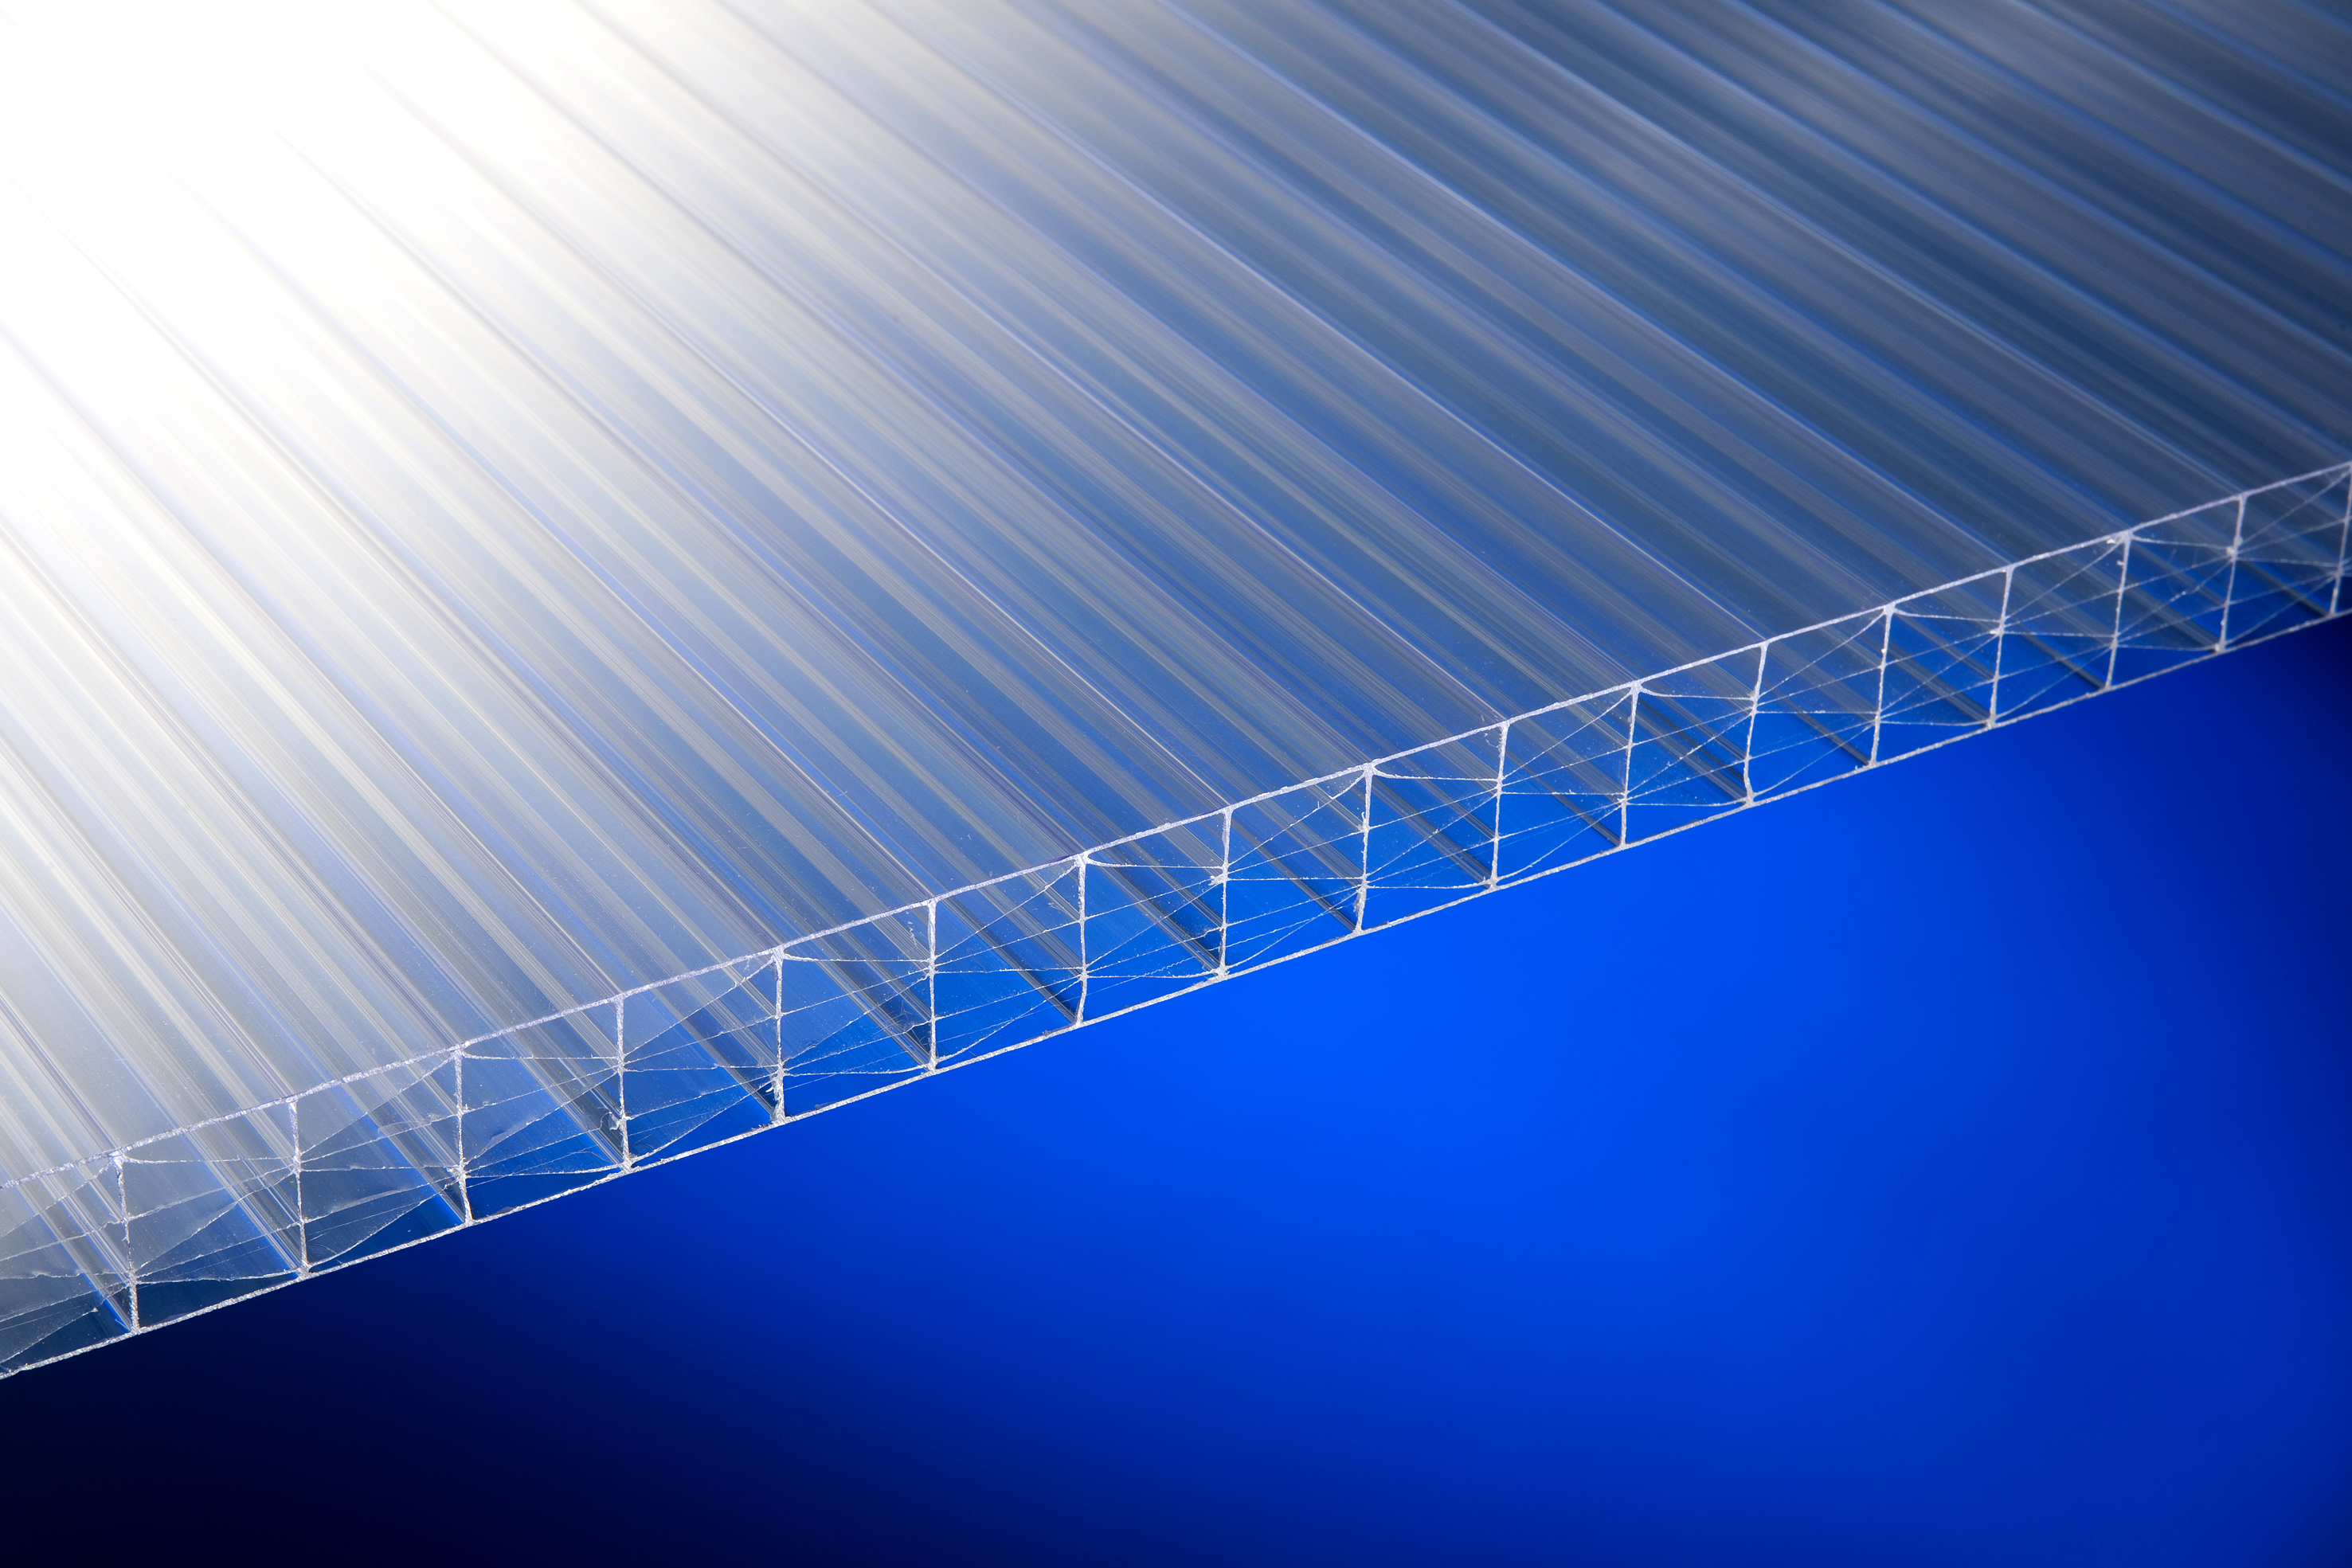 25mm Polycarbonate Sheet, 25mm Polycarbonate Multiwall Glazing Sheets - Standard Rectangles